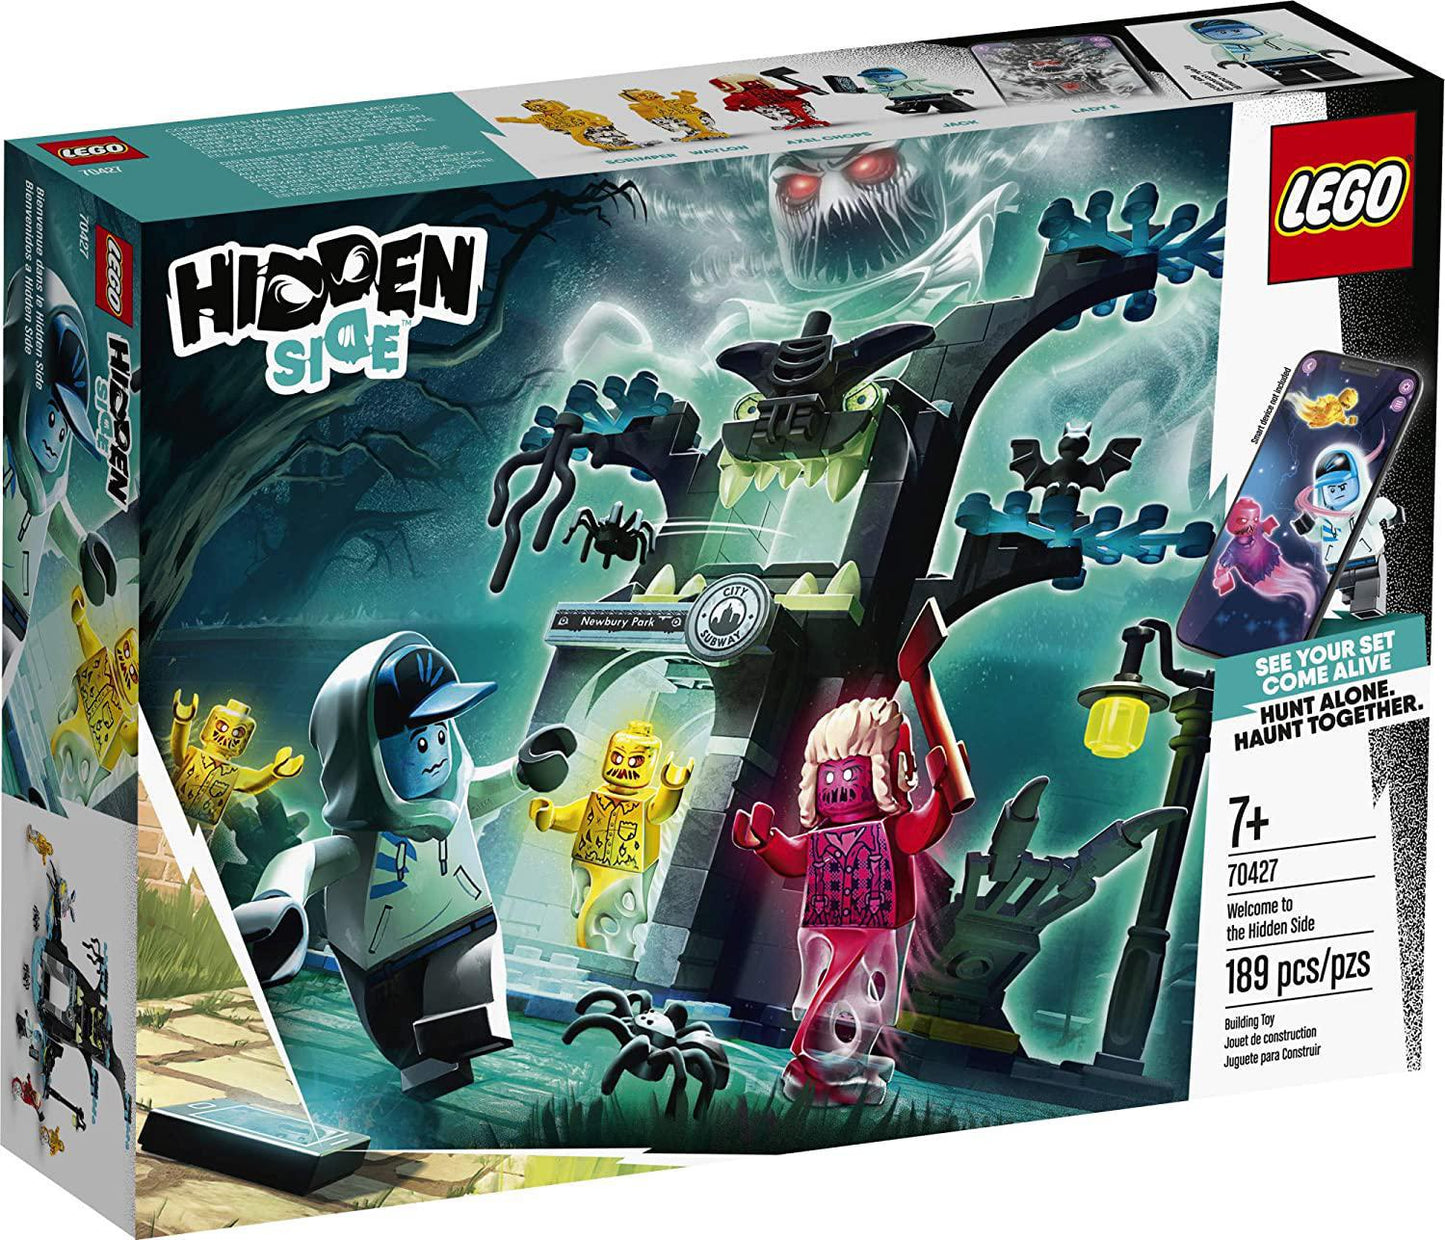 LEGO Welcome to The Hidden Side 70427 Ghost Toy, Cool Augmented Reality Play Experience for Kids, New 2020 (189 Pieces)